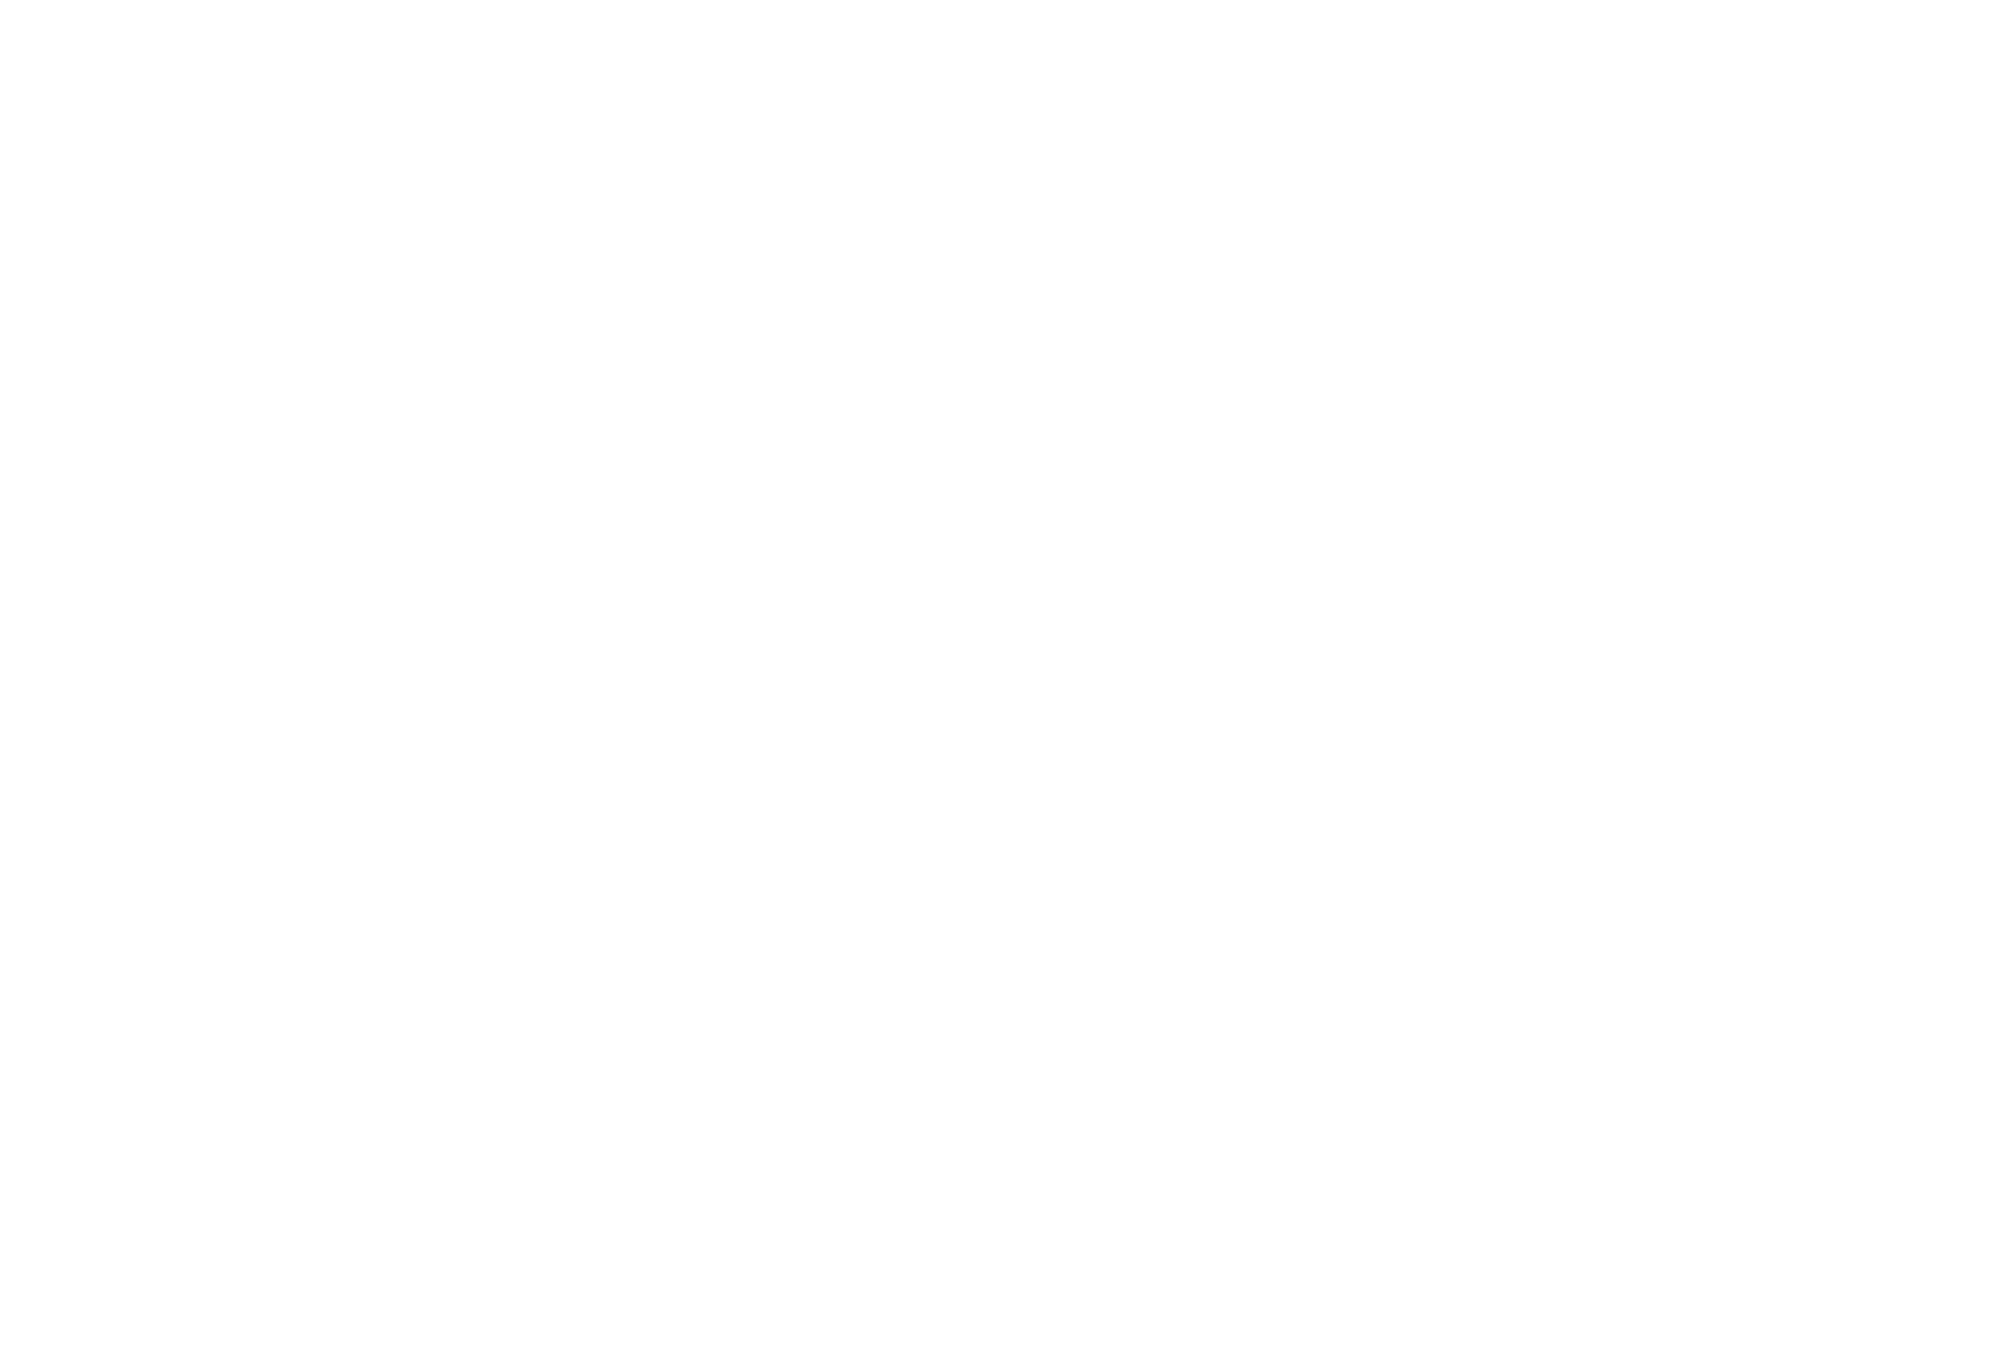 Clear by Integrity White Logo